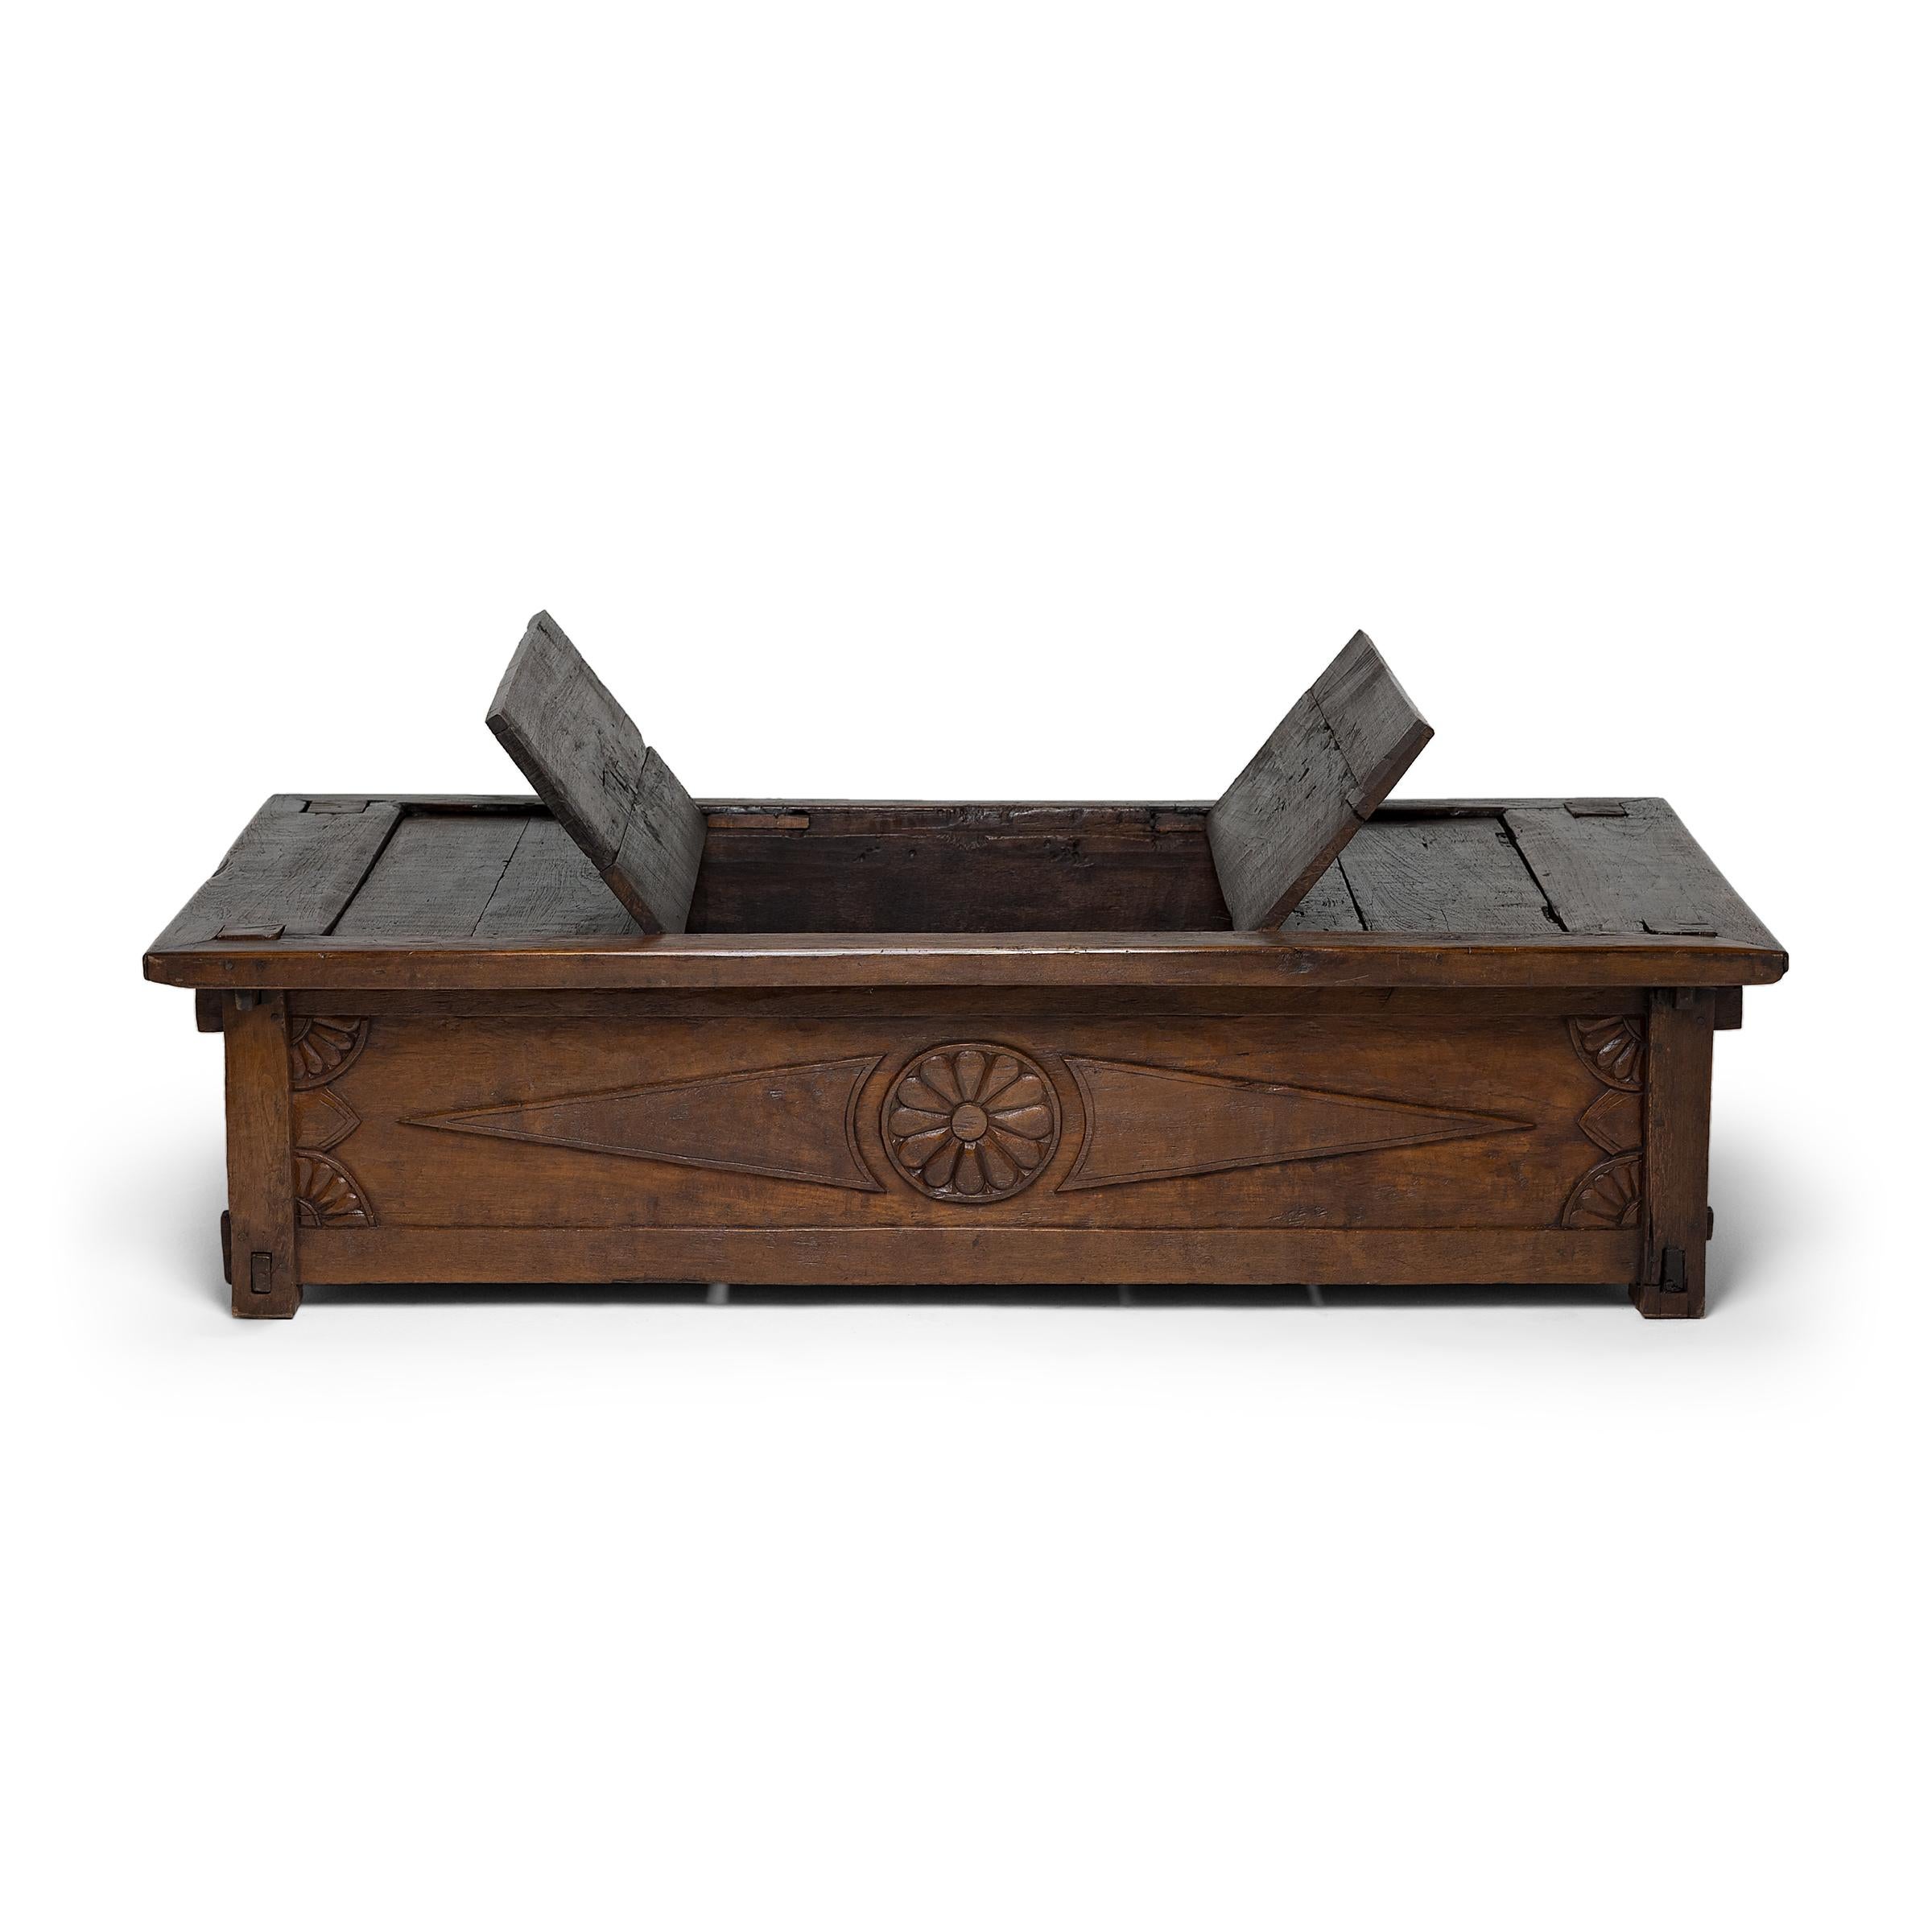 Indonesian Teak Rice Bed, c. 1900 In Good Condition For Sale In Chicago, IL